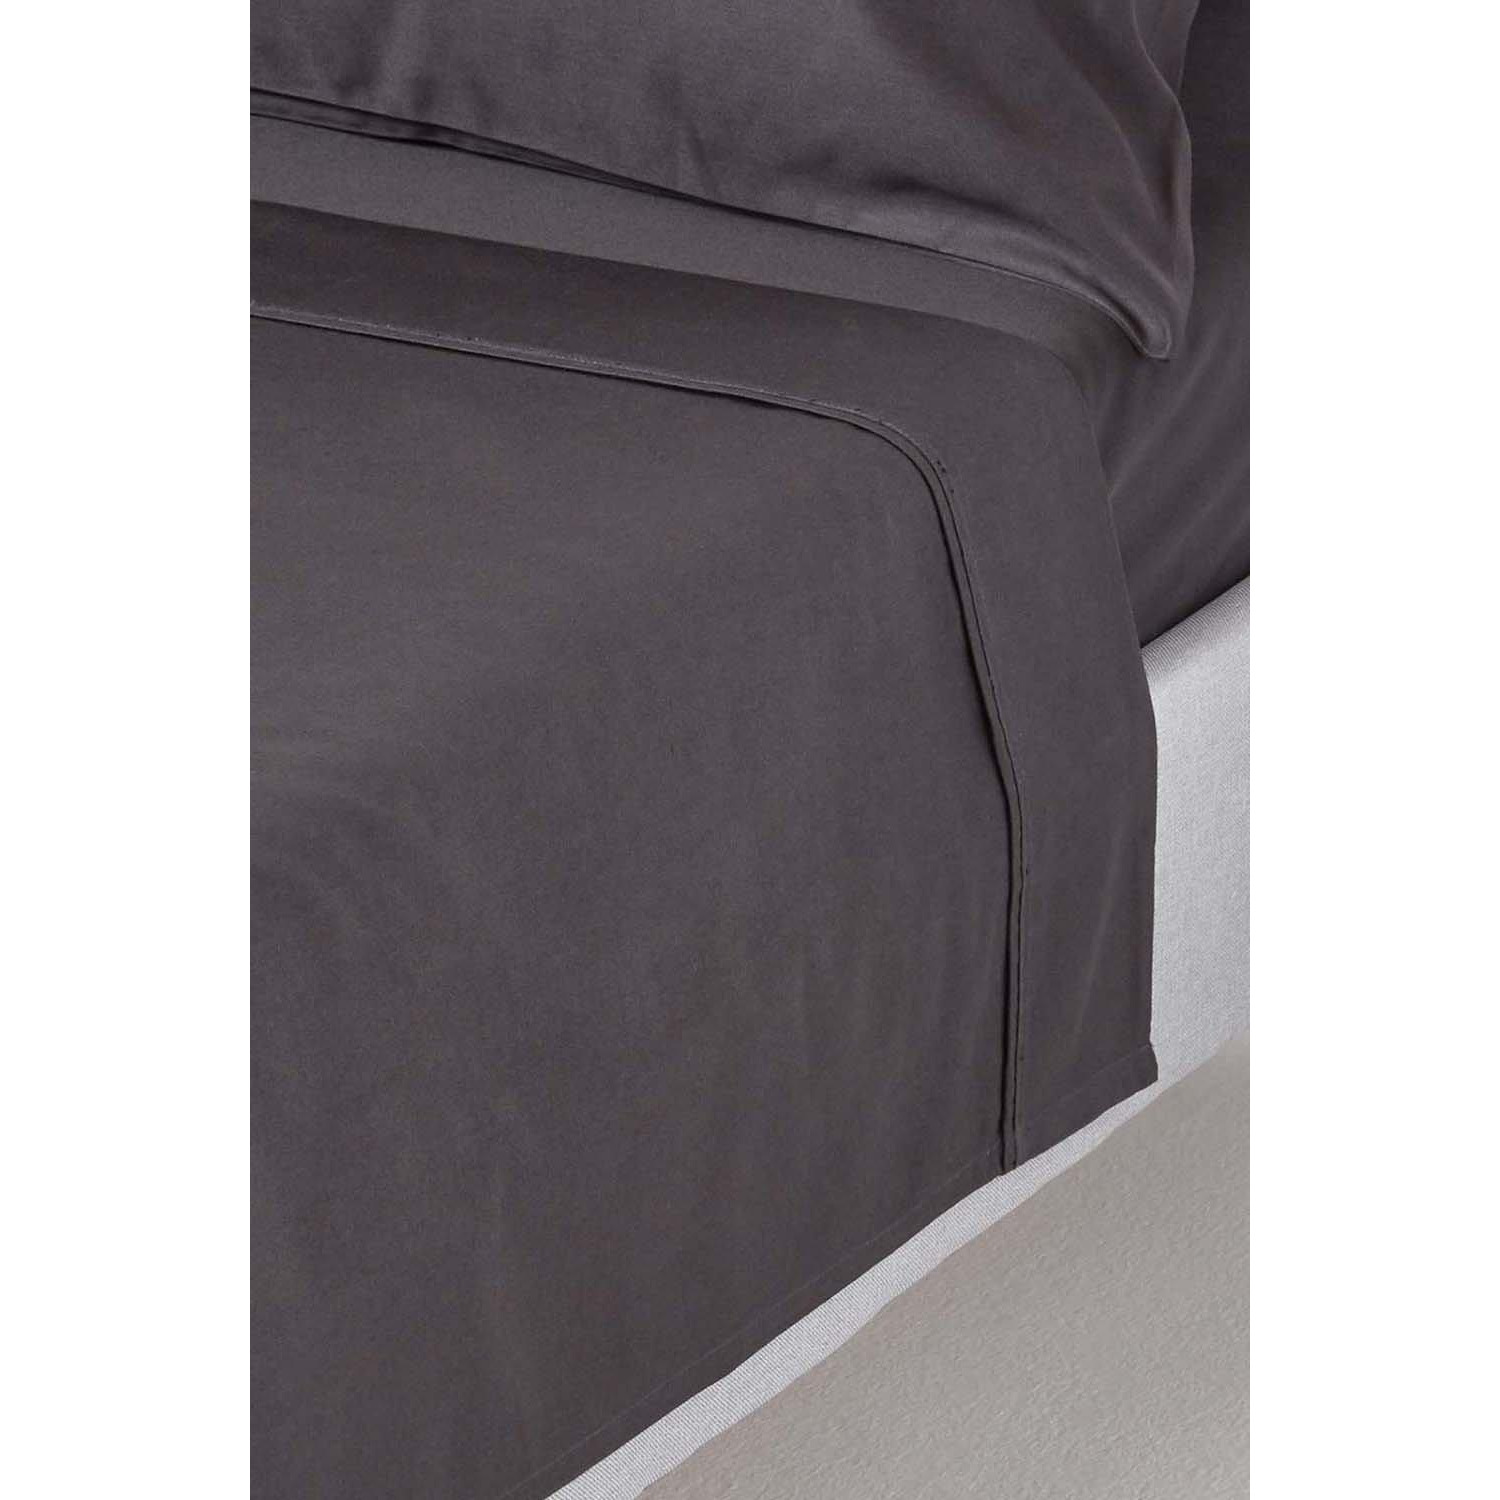 Egyptian Cotton Flat Sheet 1000 Thread Count - image 1